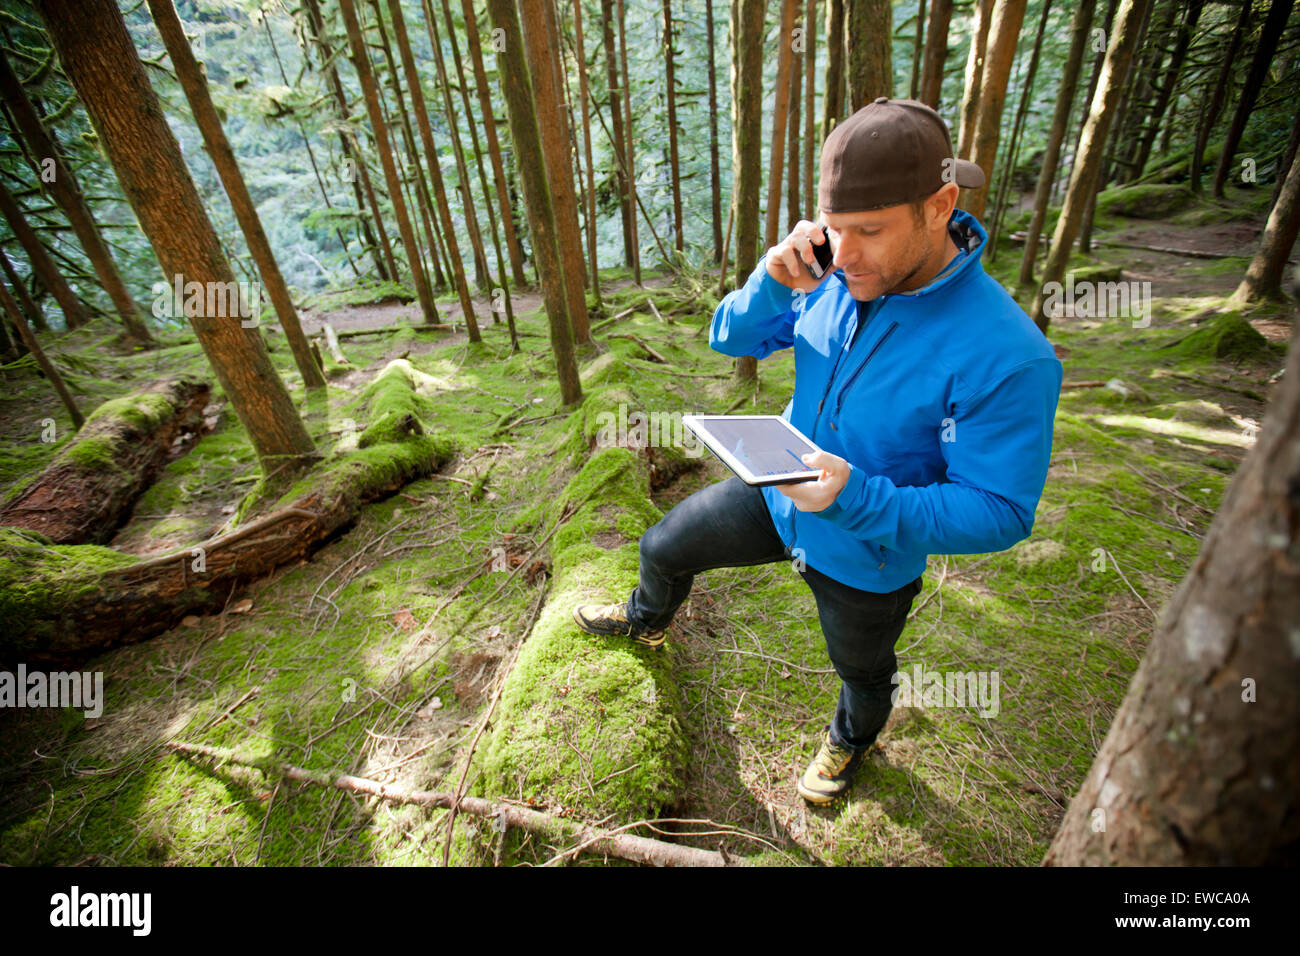 A man talks on phone while working on a tablet. Stock Photo